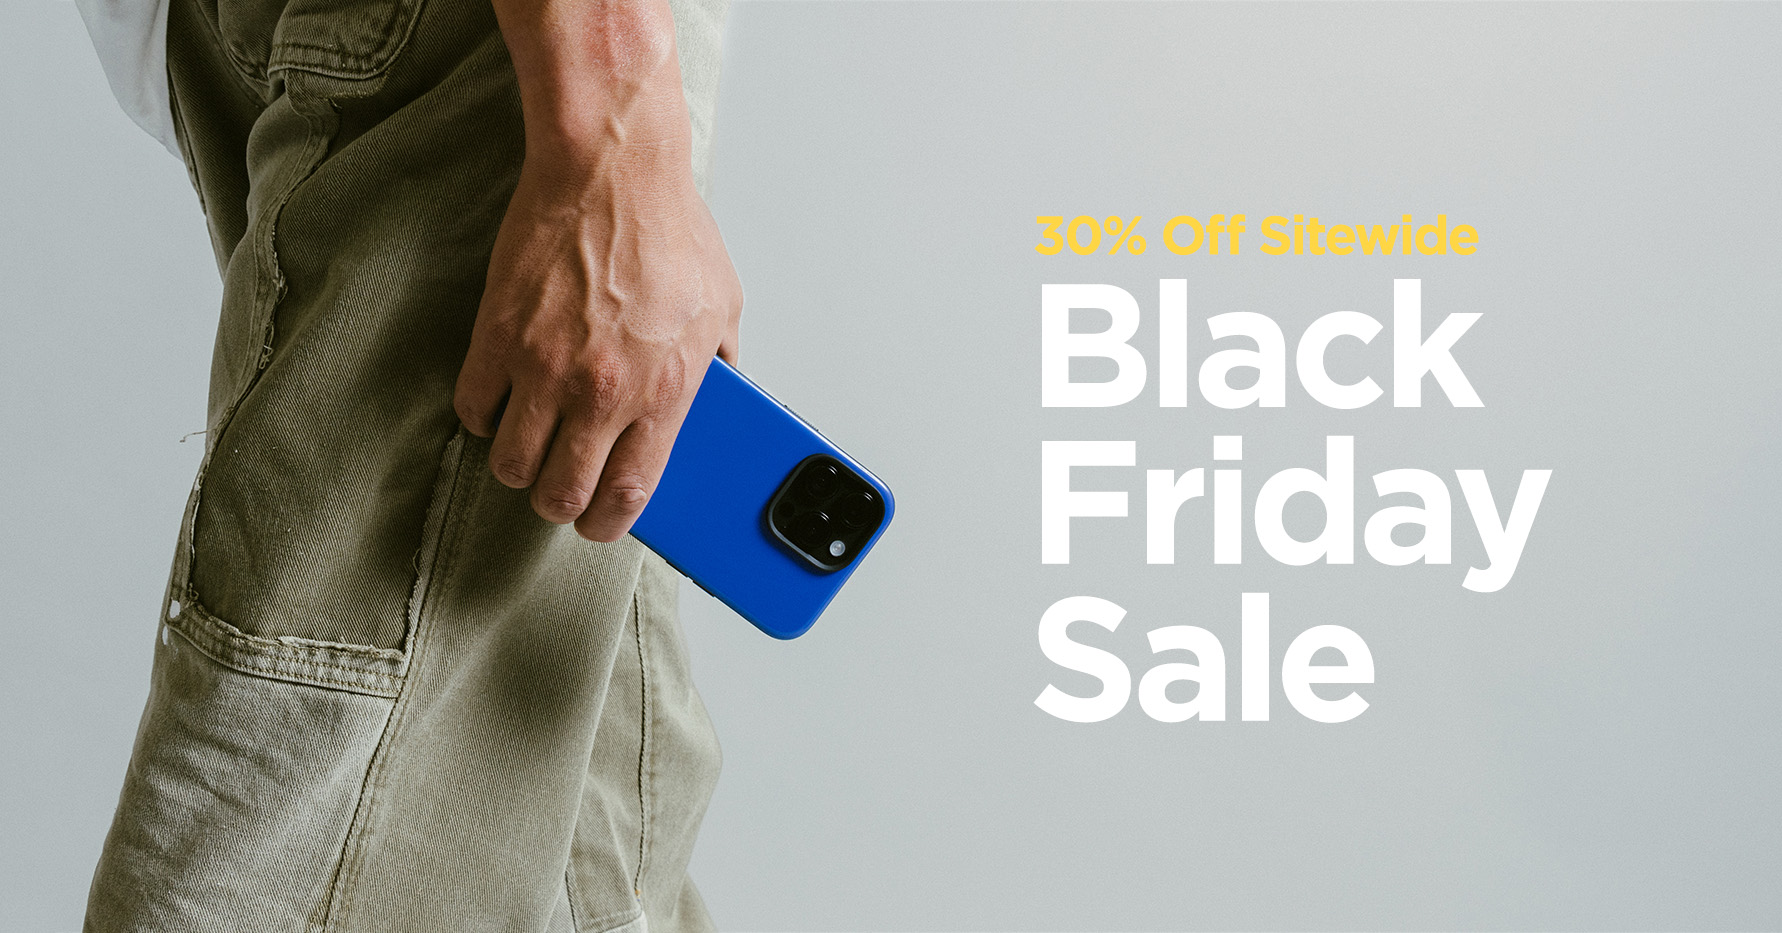 Save on products you would buy anyway during Black Friday